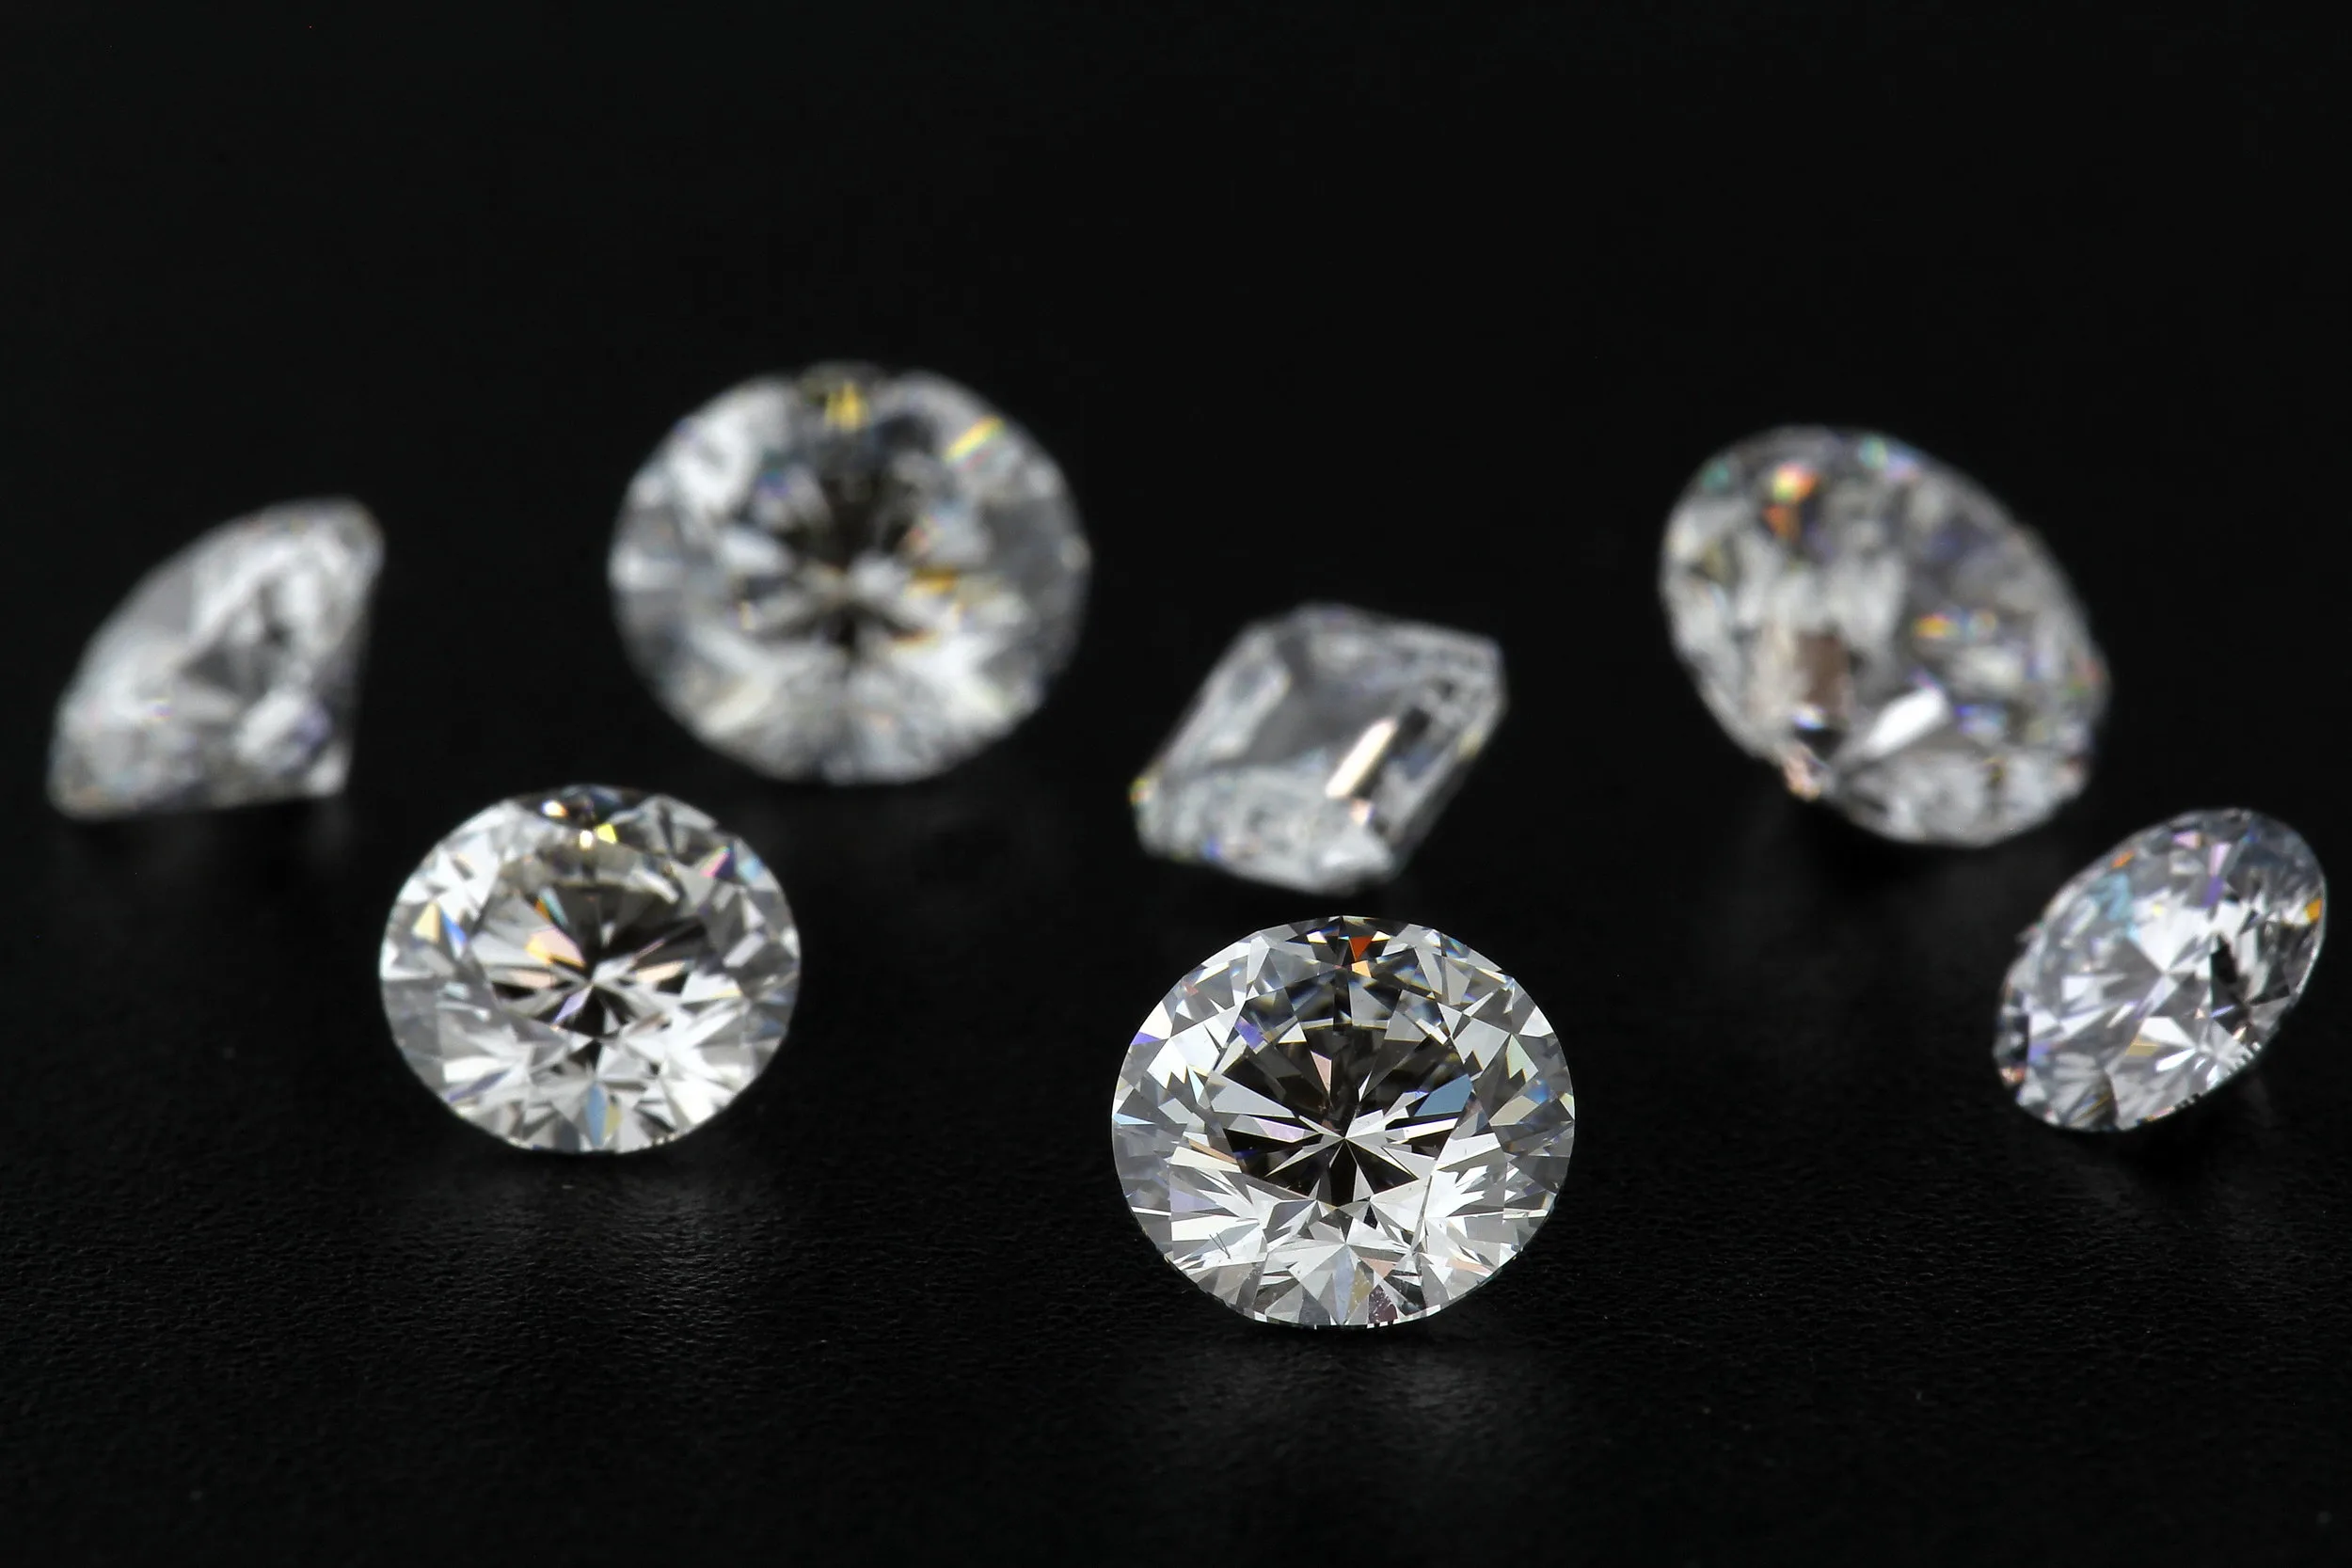 The Environment Matters: Diamonds Shouldn't Cost the Earth